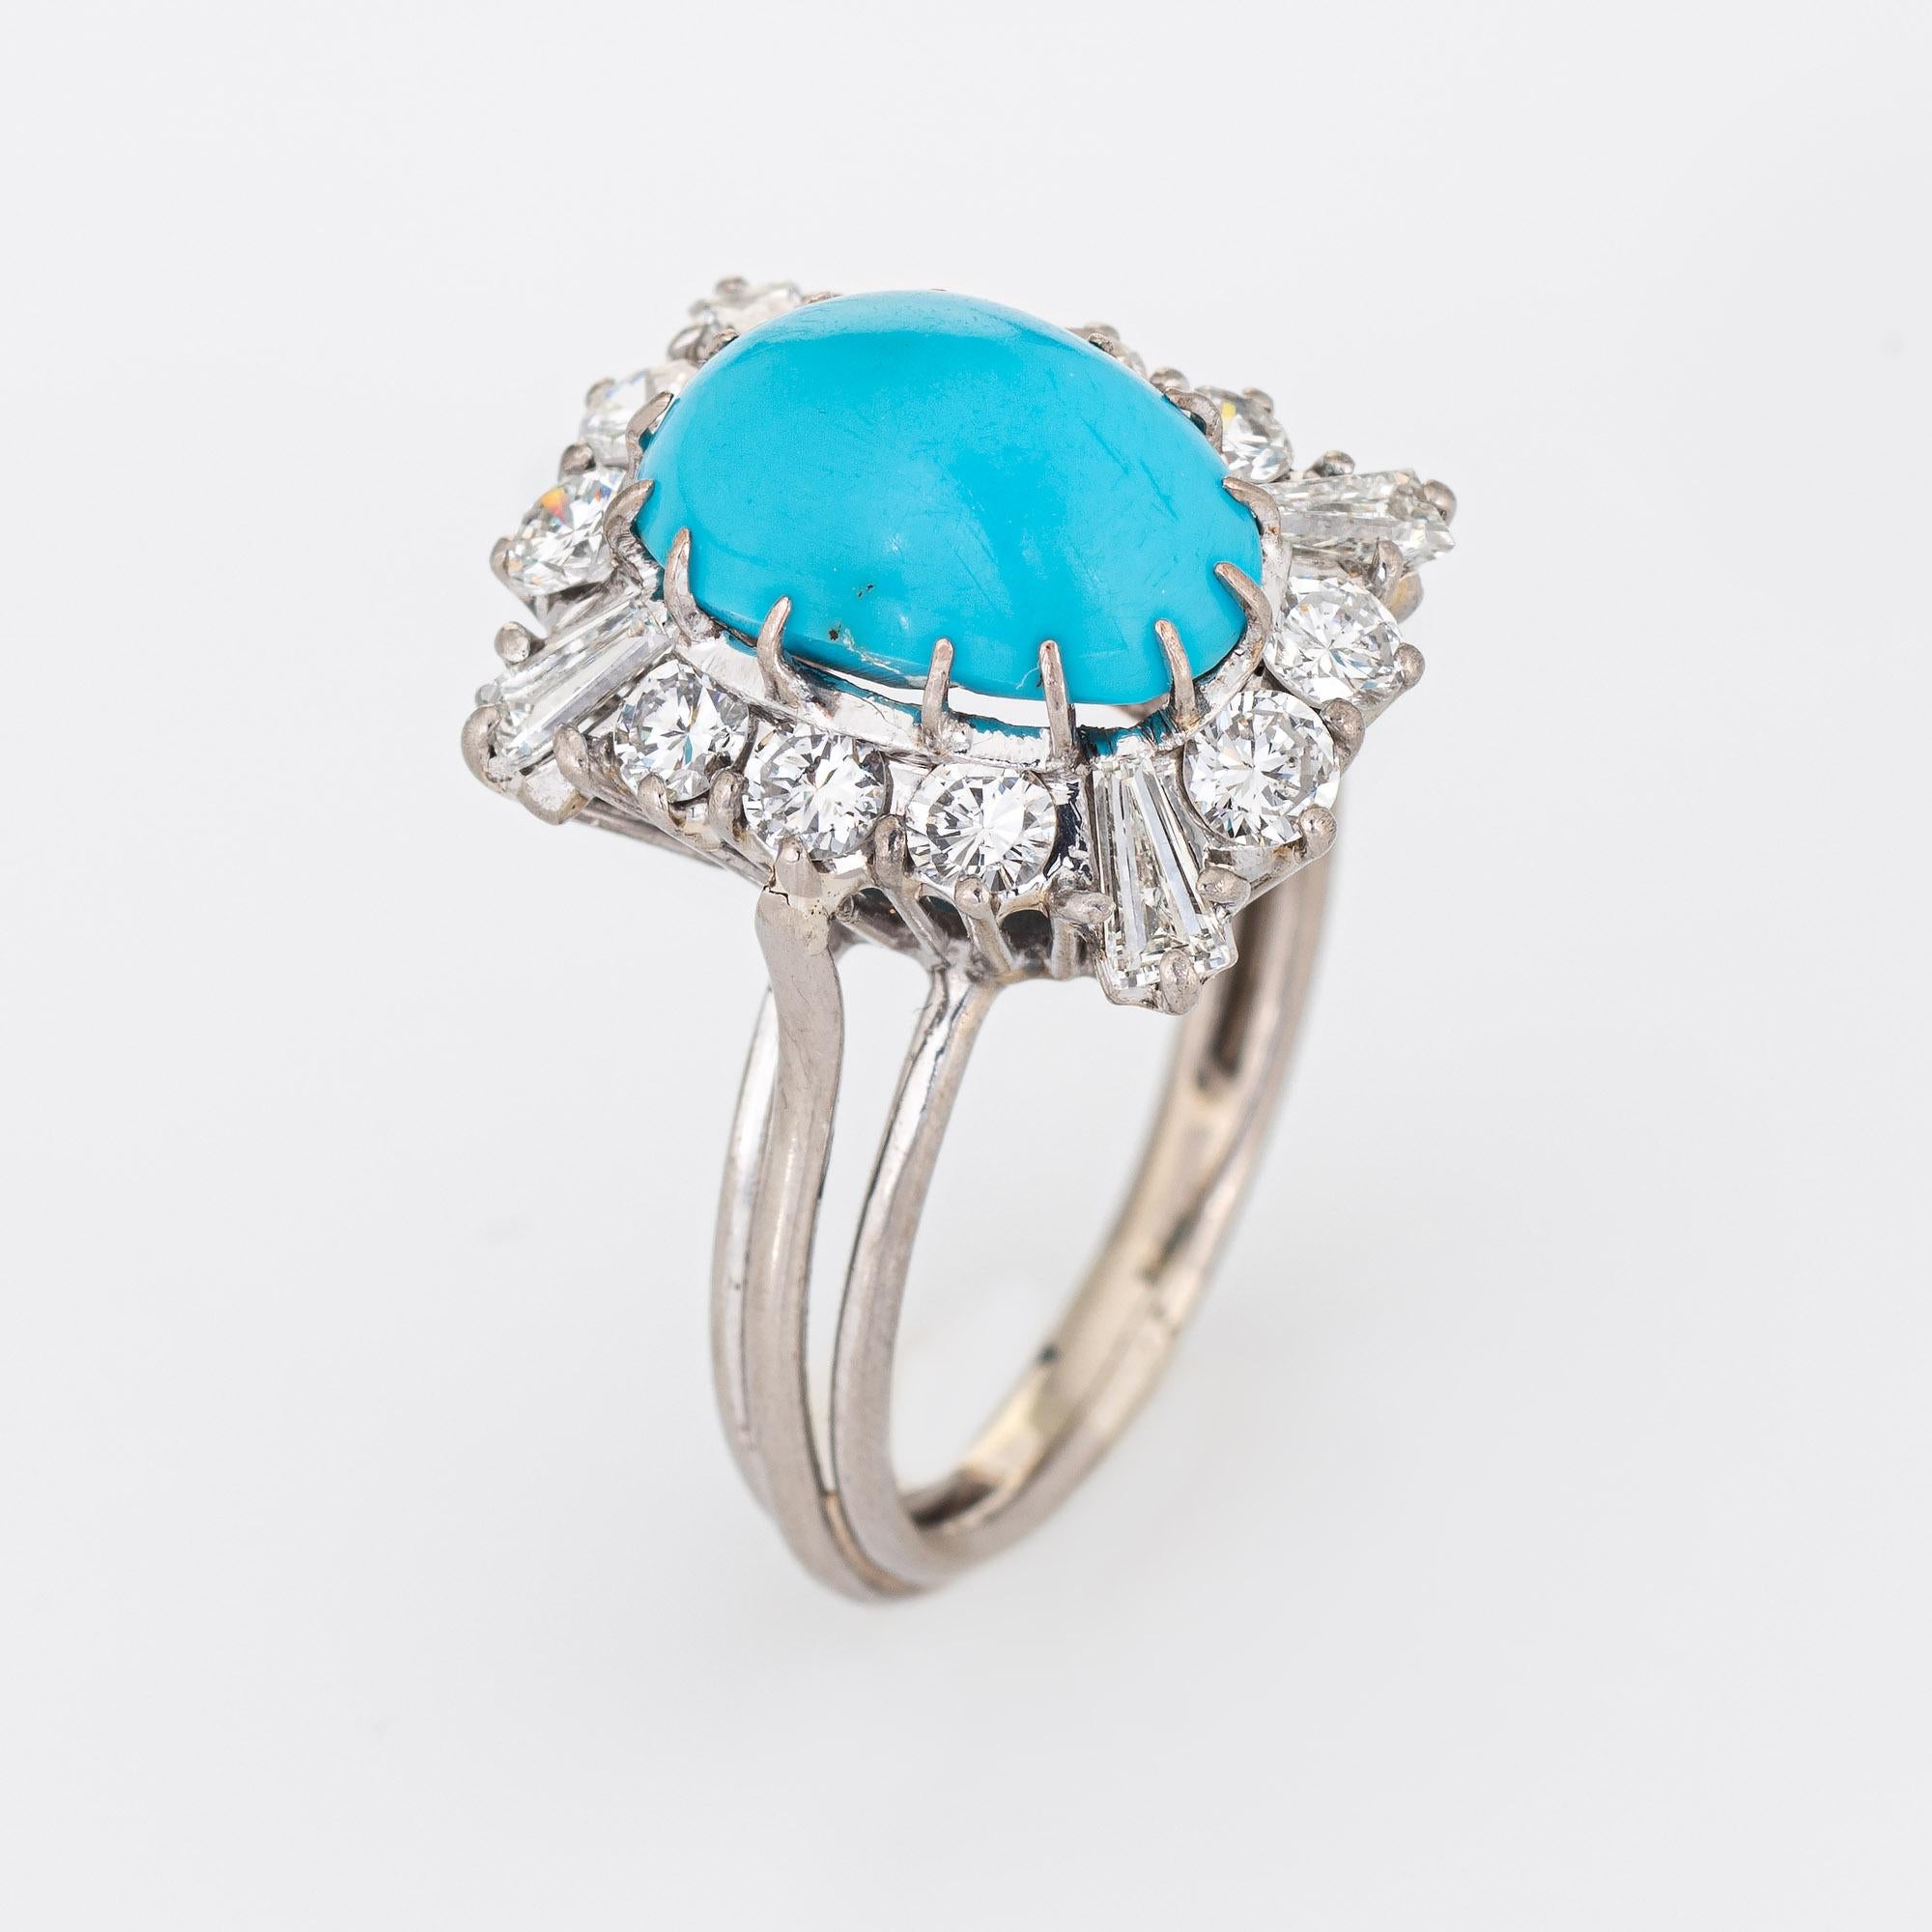 Stylish vintage turquoise & diamond cocktail ring (circa 1950s to 1960s) crafted in 18 karat white gold. 

Cabochon turquoise measures 11mm x 8mm (estimated at 5 carats), accented with an estimated 1 carat of mixed cut diamonds (round brilliant and